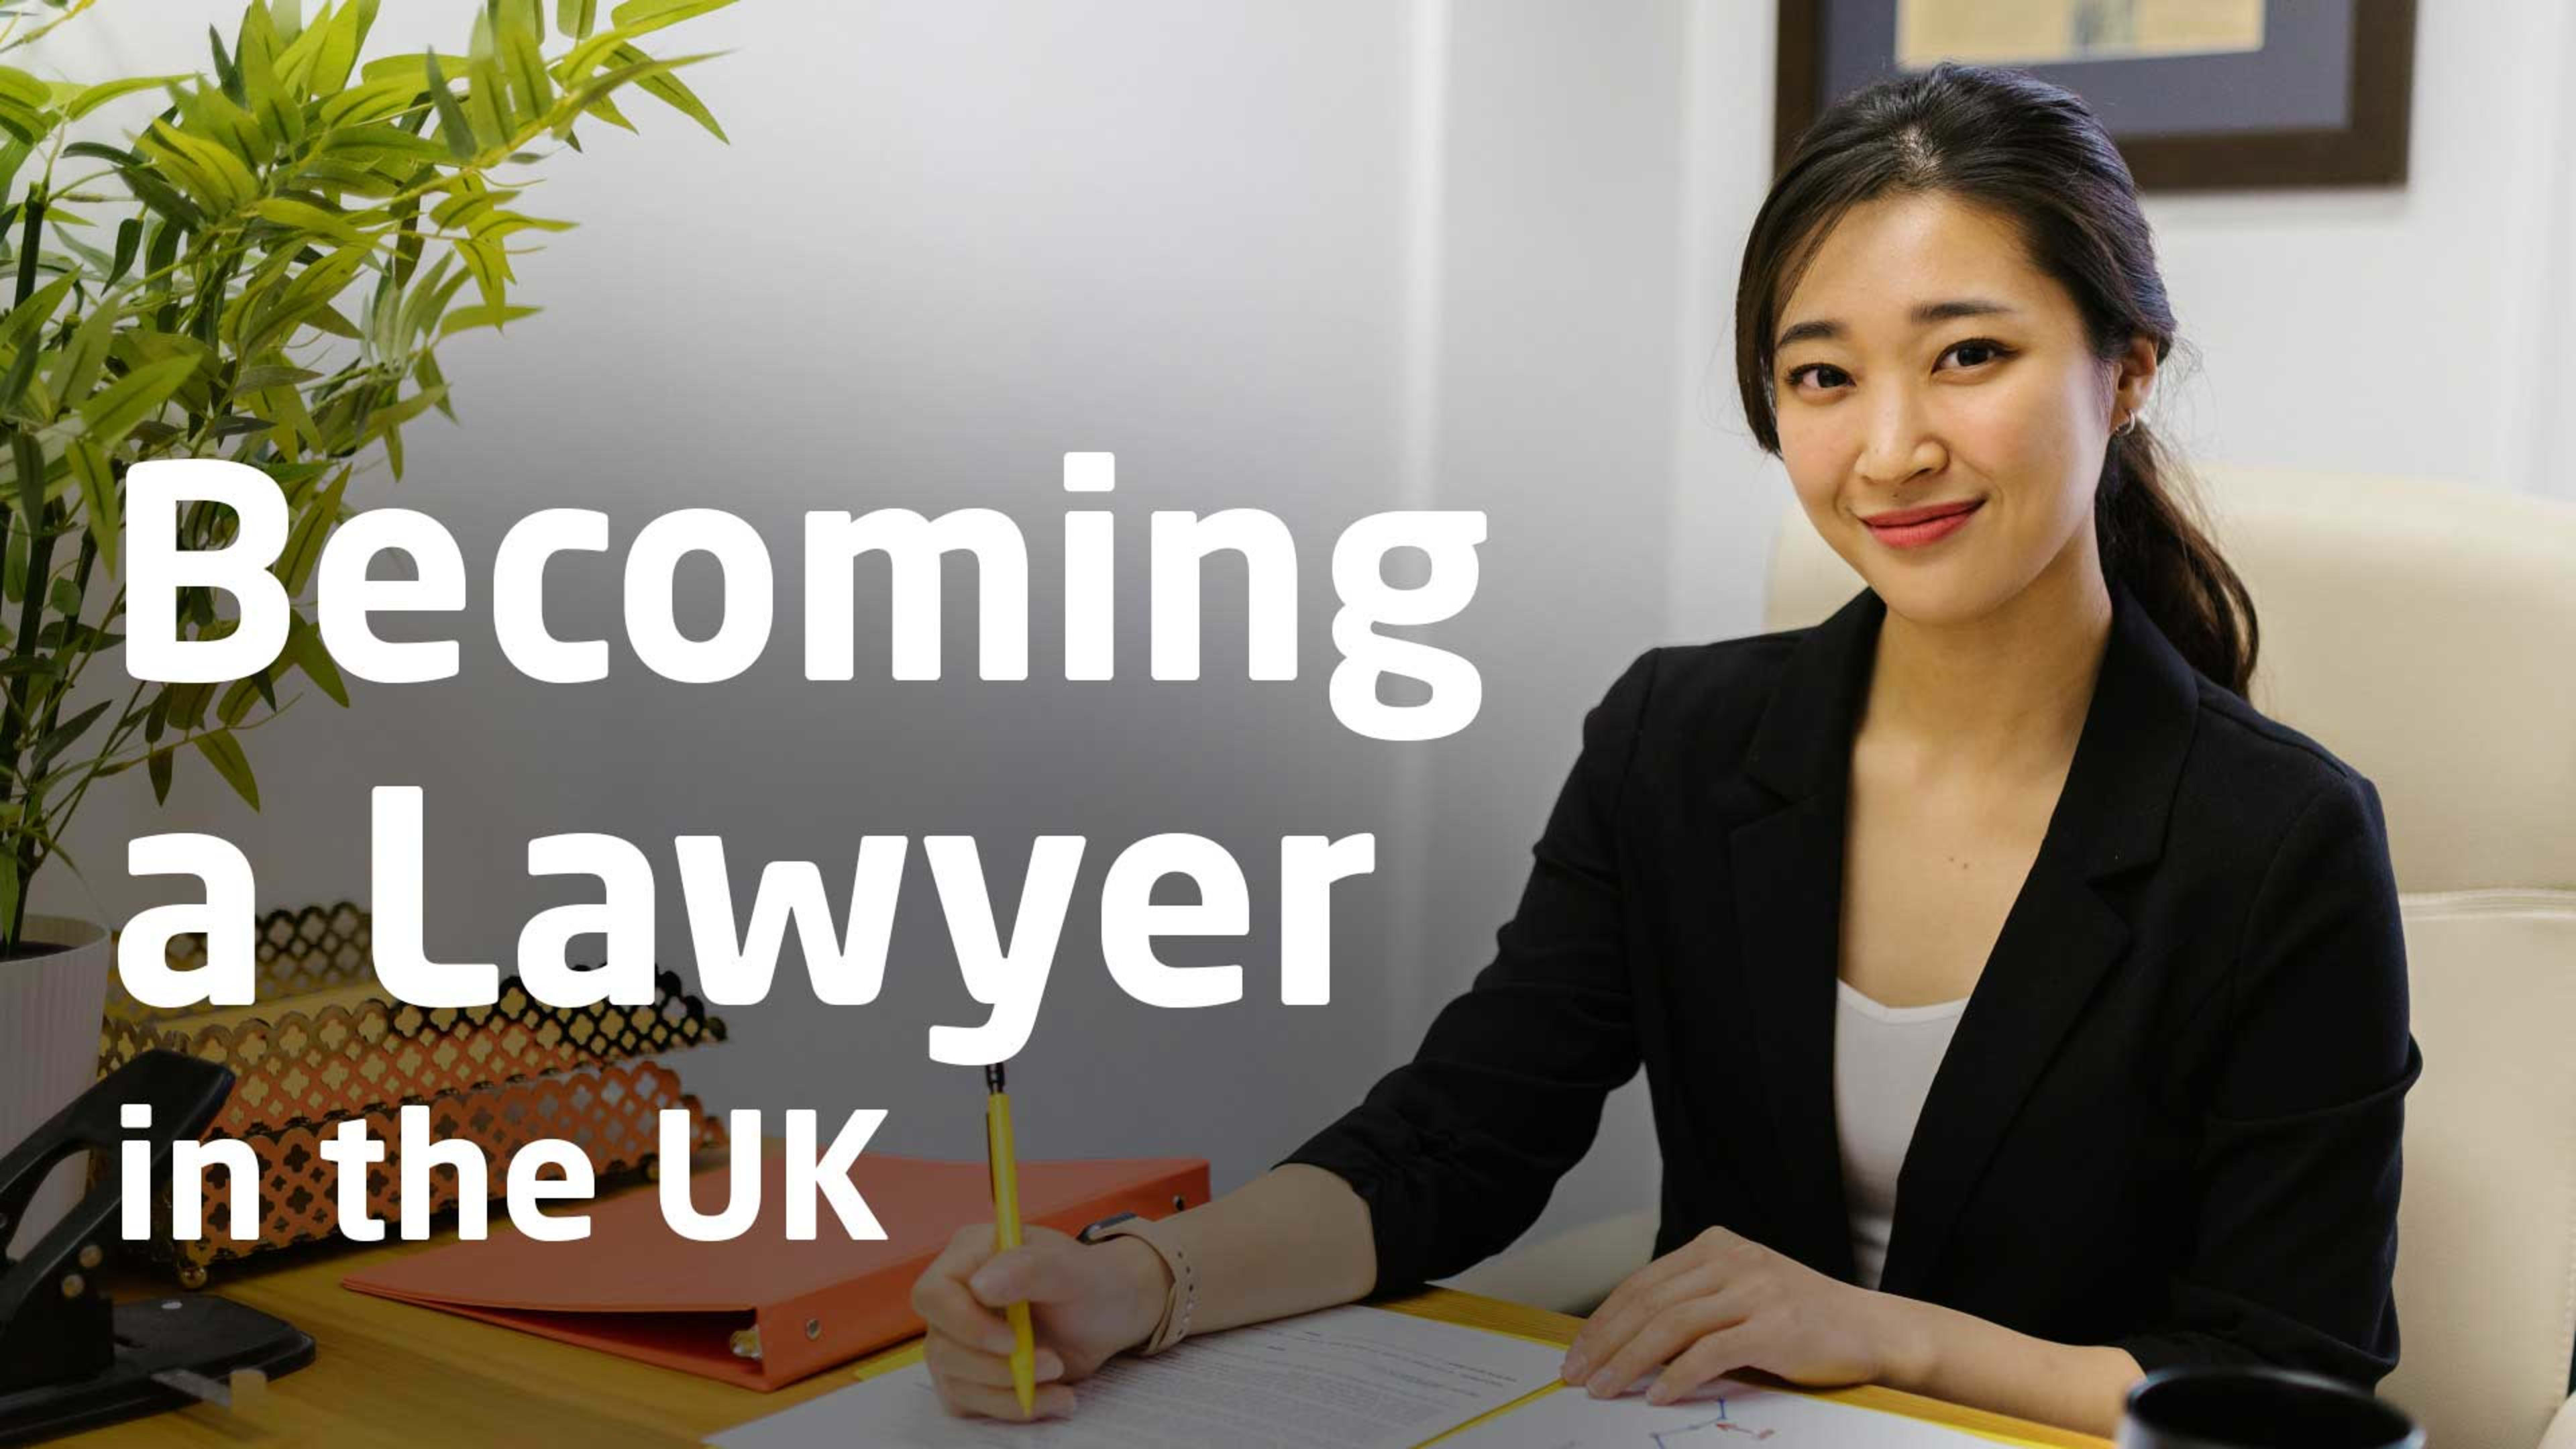 CITY / How to Become a Lawyer / Video Thumbnail